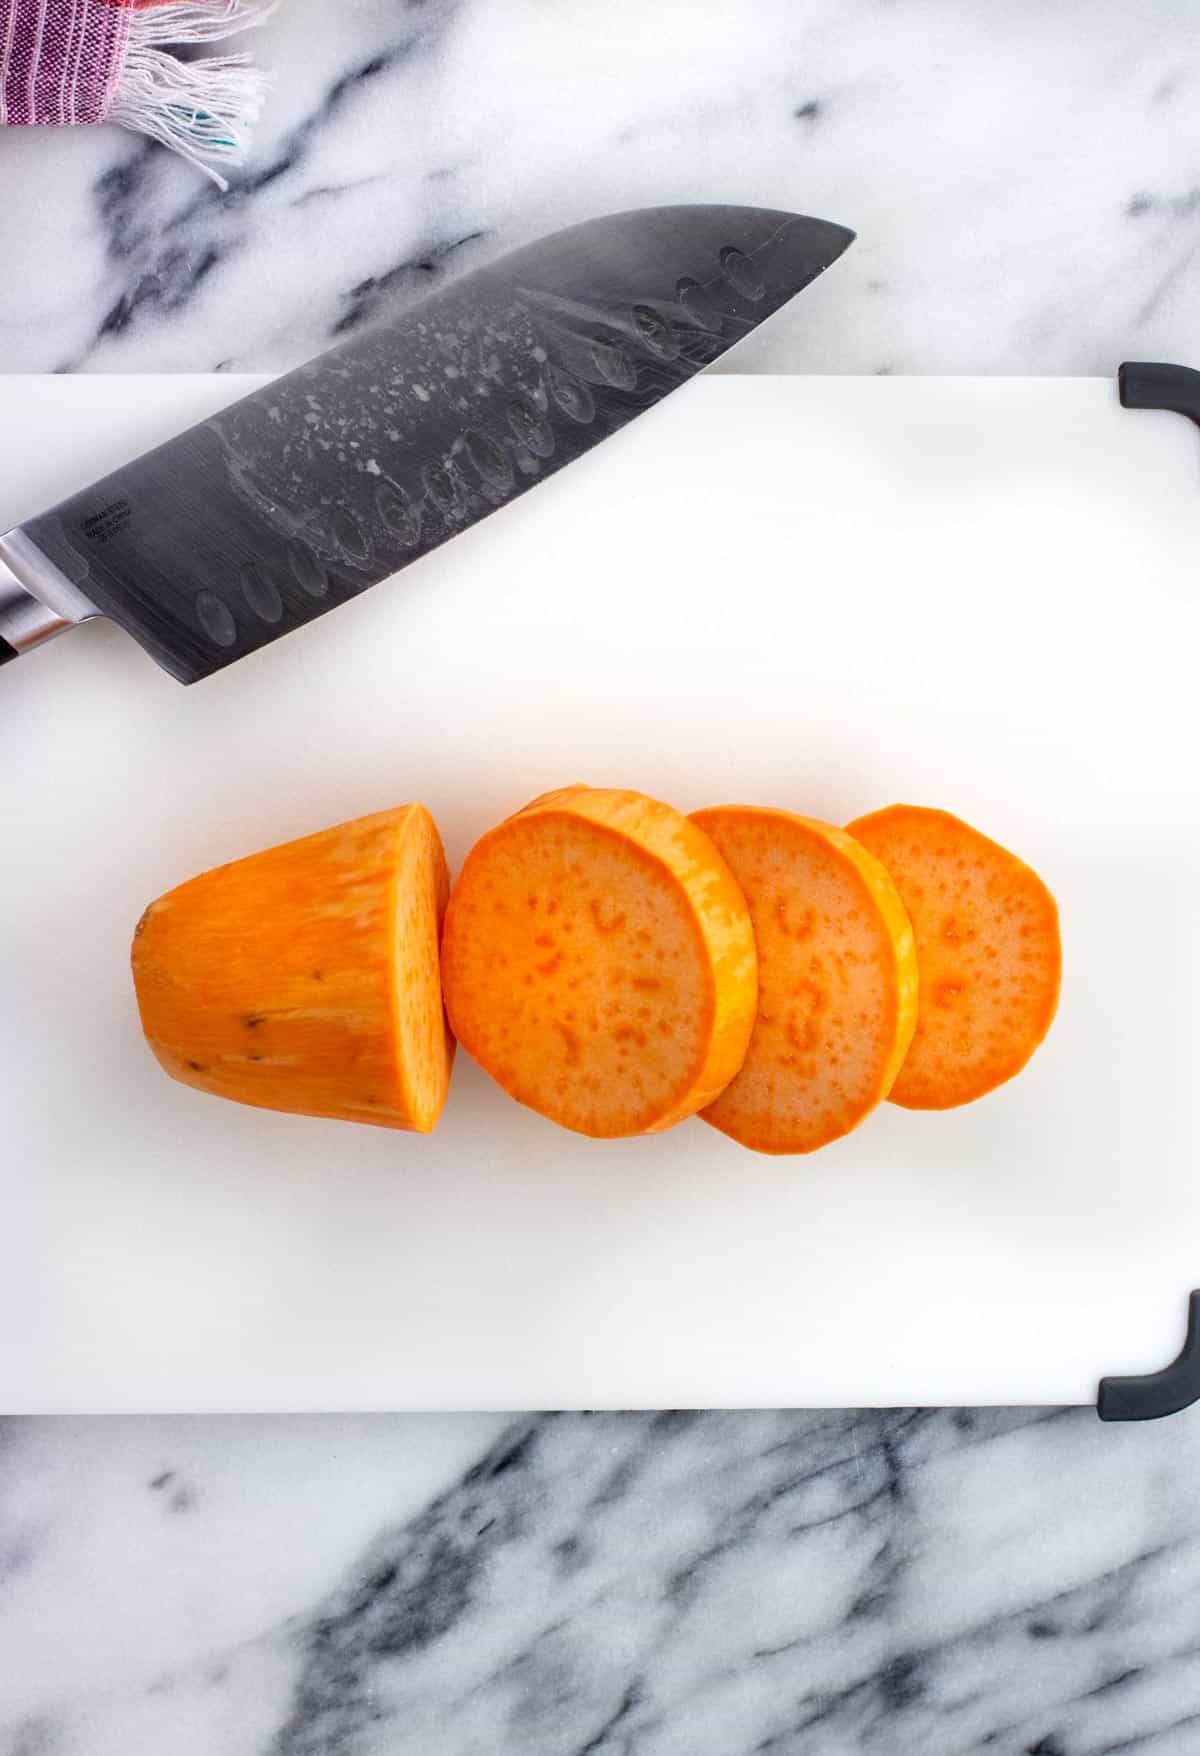 A sweet potato on a cutting board cut into sections.